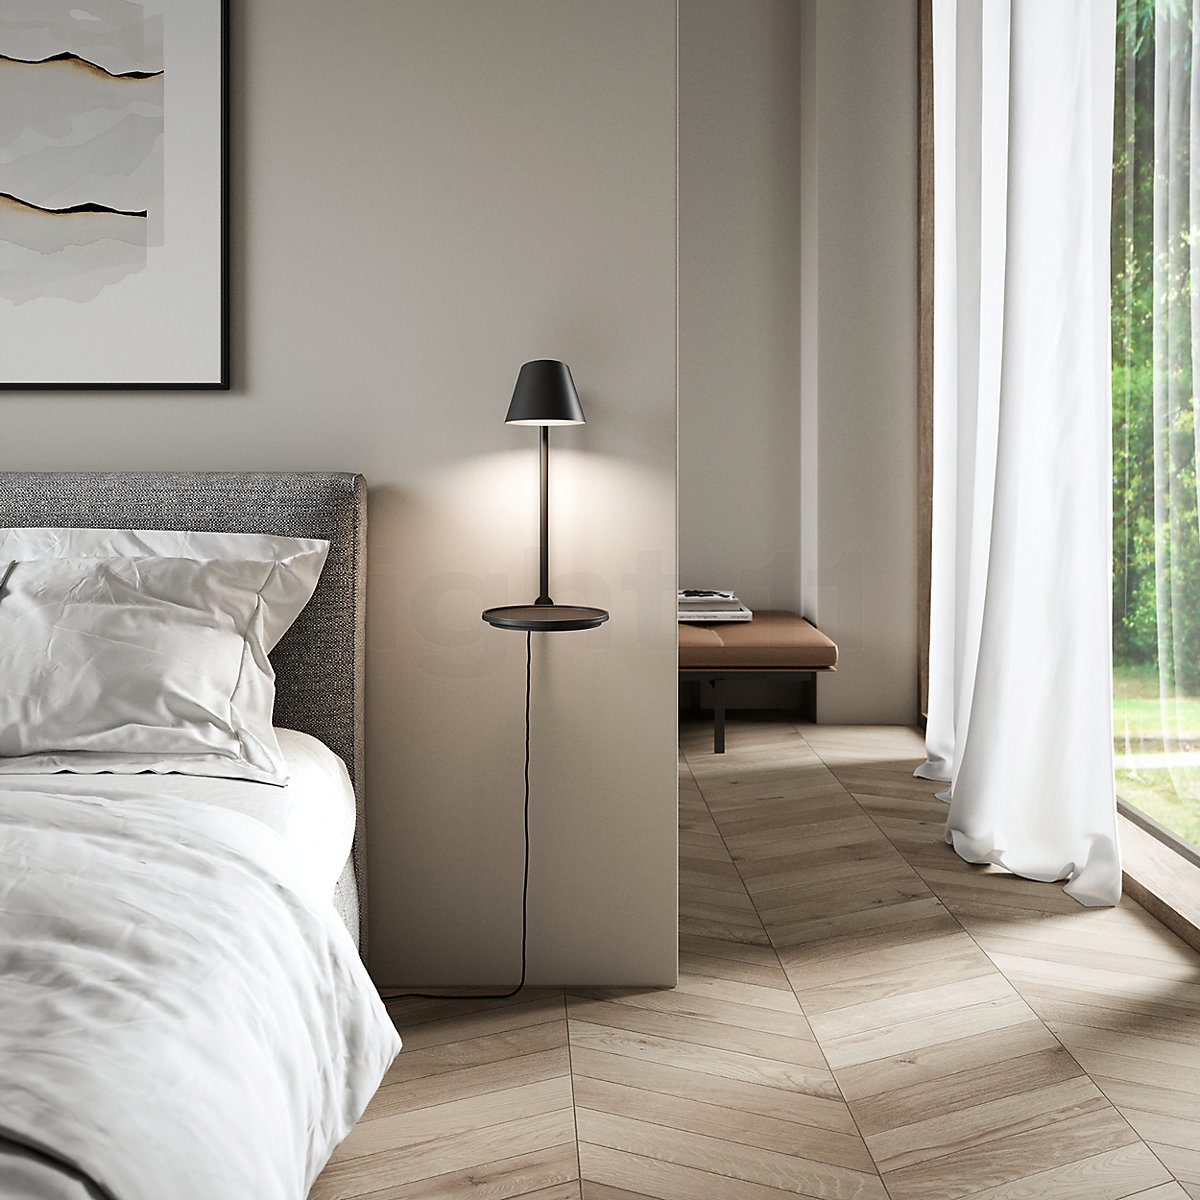 Design bei the Wandleuchte Stay LED People kaufen for